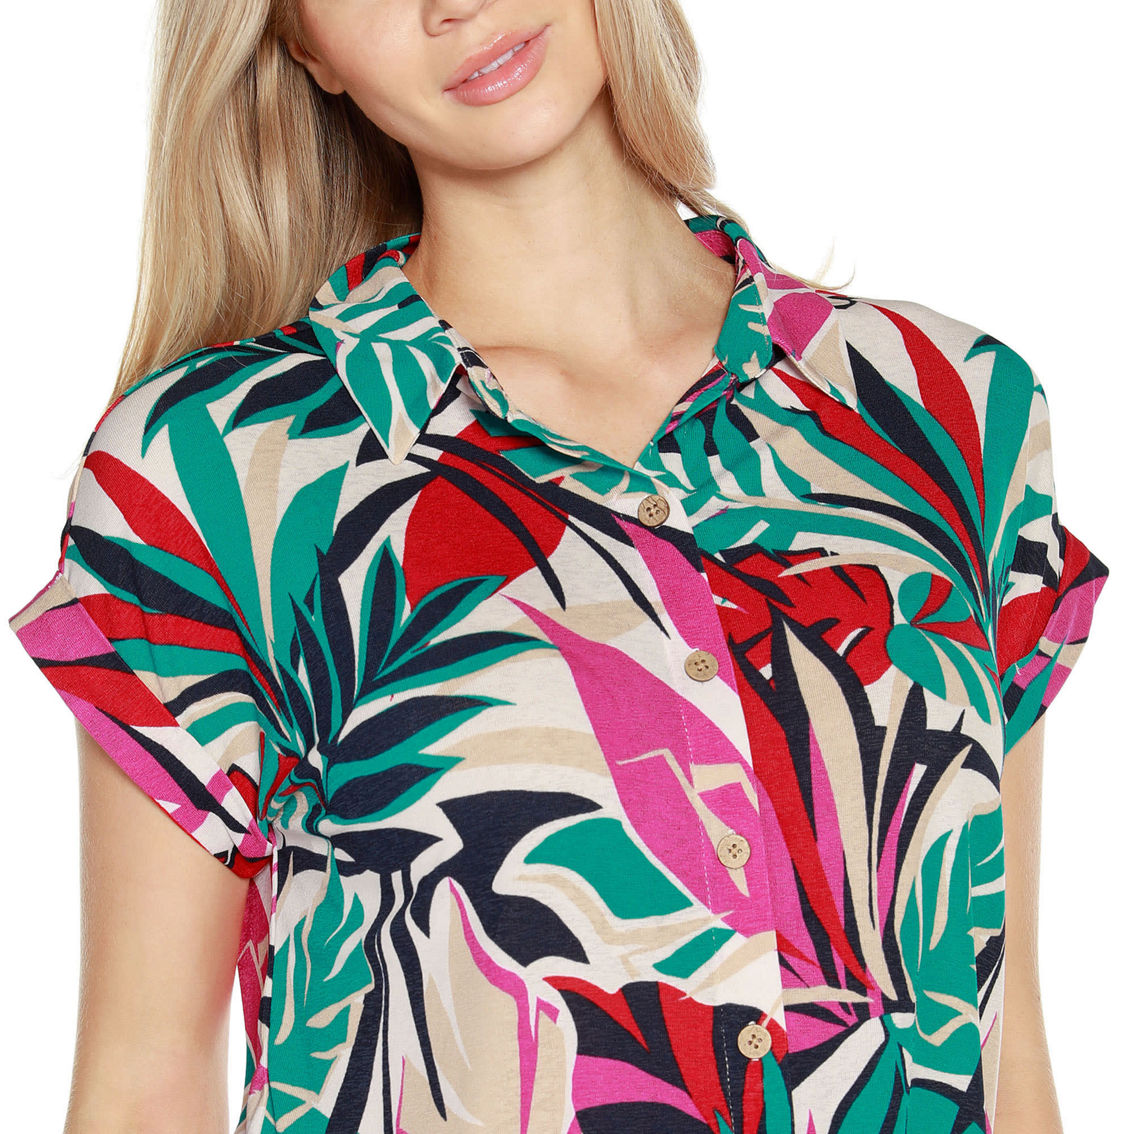 Belldini Printed Collared Button-Front Printed Floral Top - Image 4 of 5